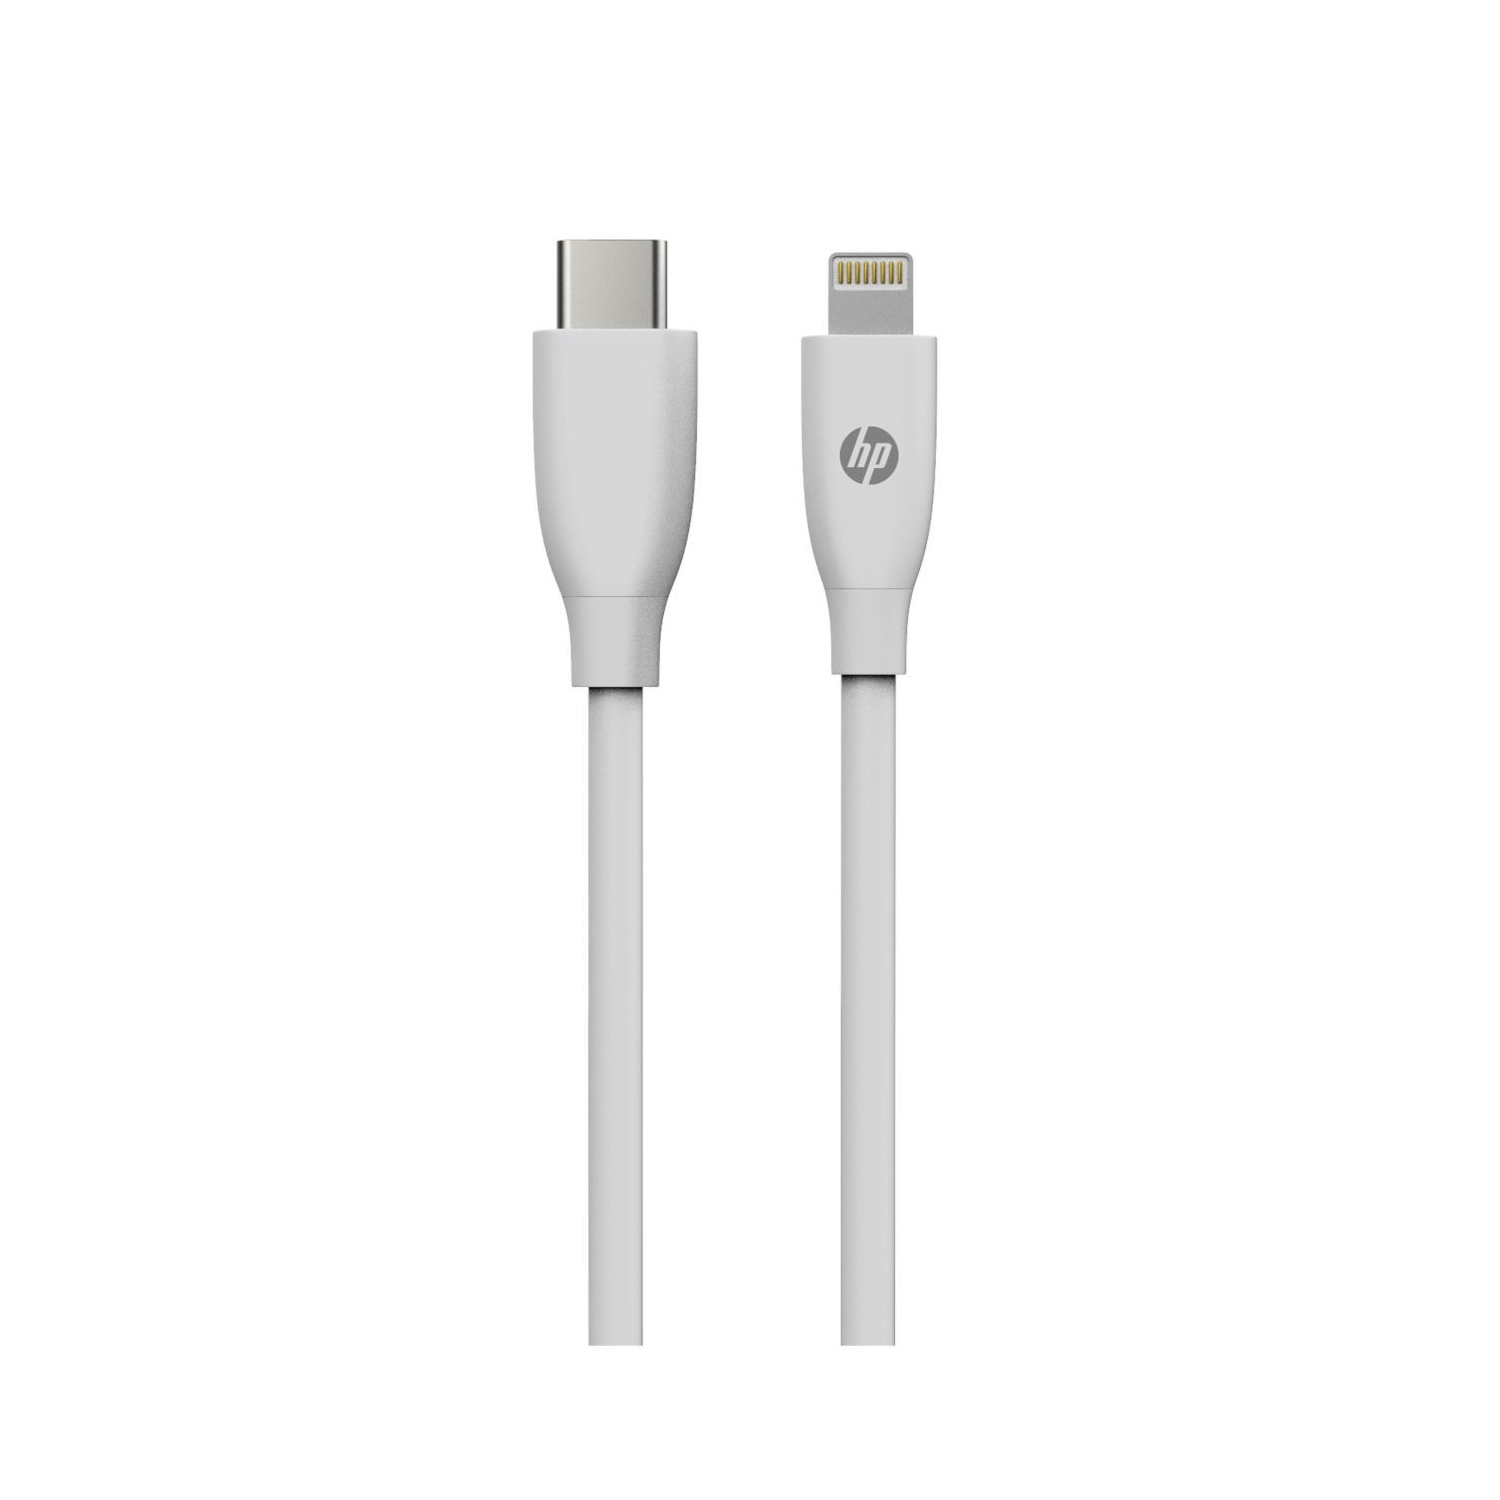 HP - USB C to Lightning Cable, Charge and Sync, 2 Meter Length, White